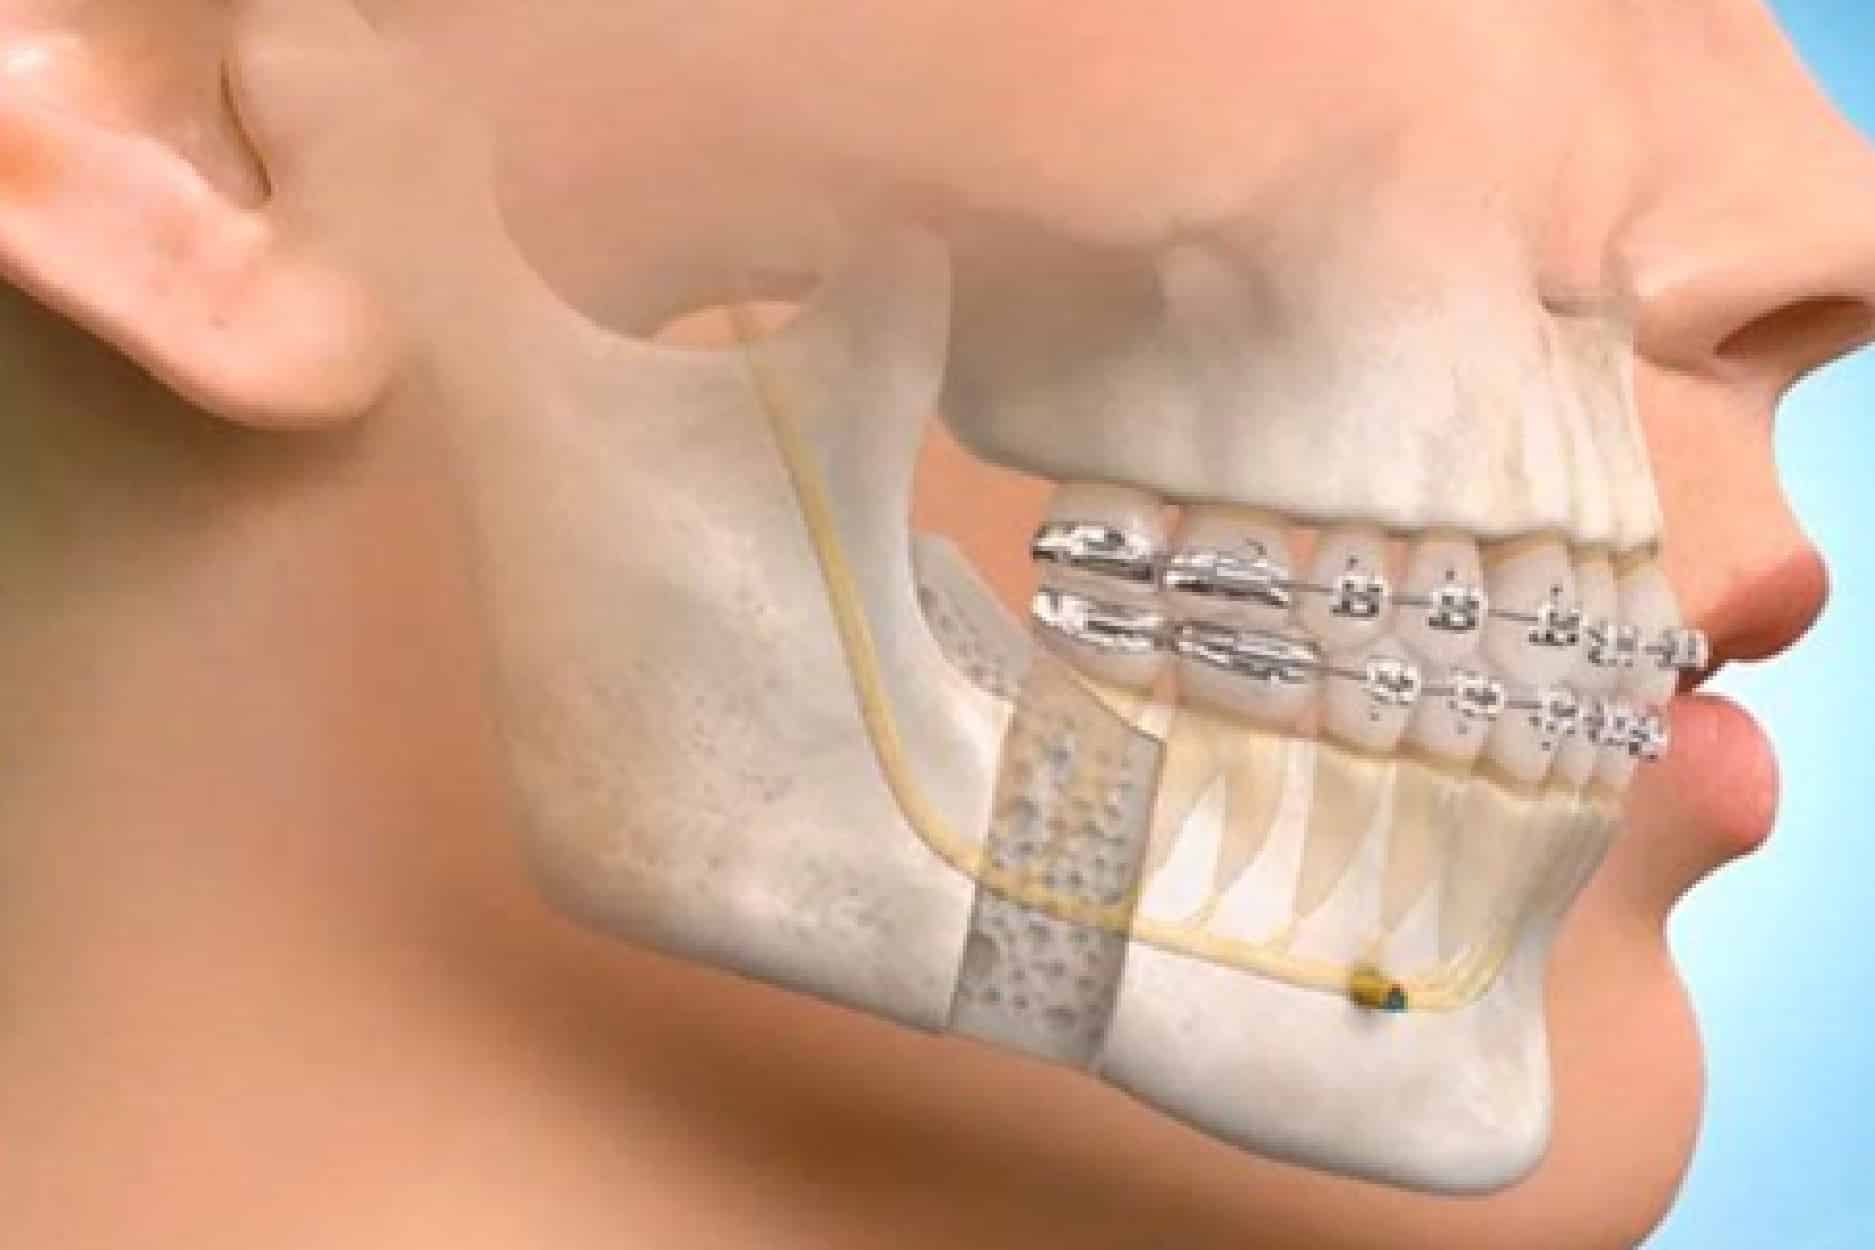 Oral & Maxillofacial Surgery Helps To Deal With Dental Complications